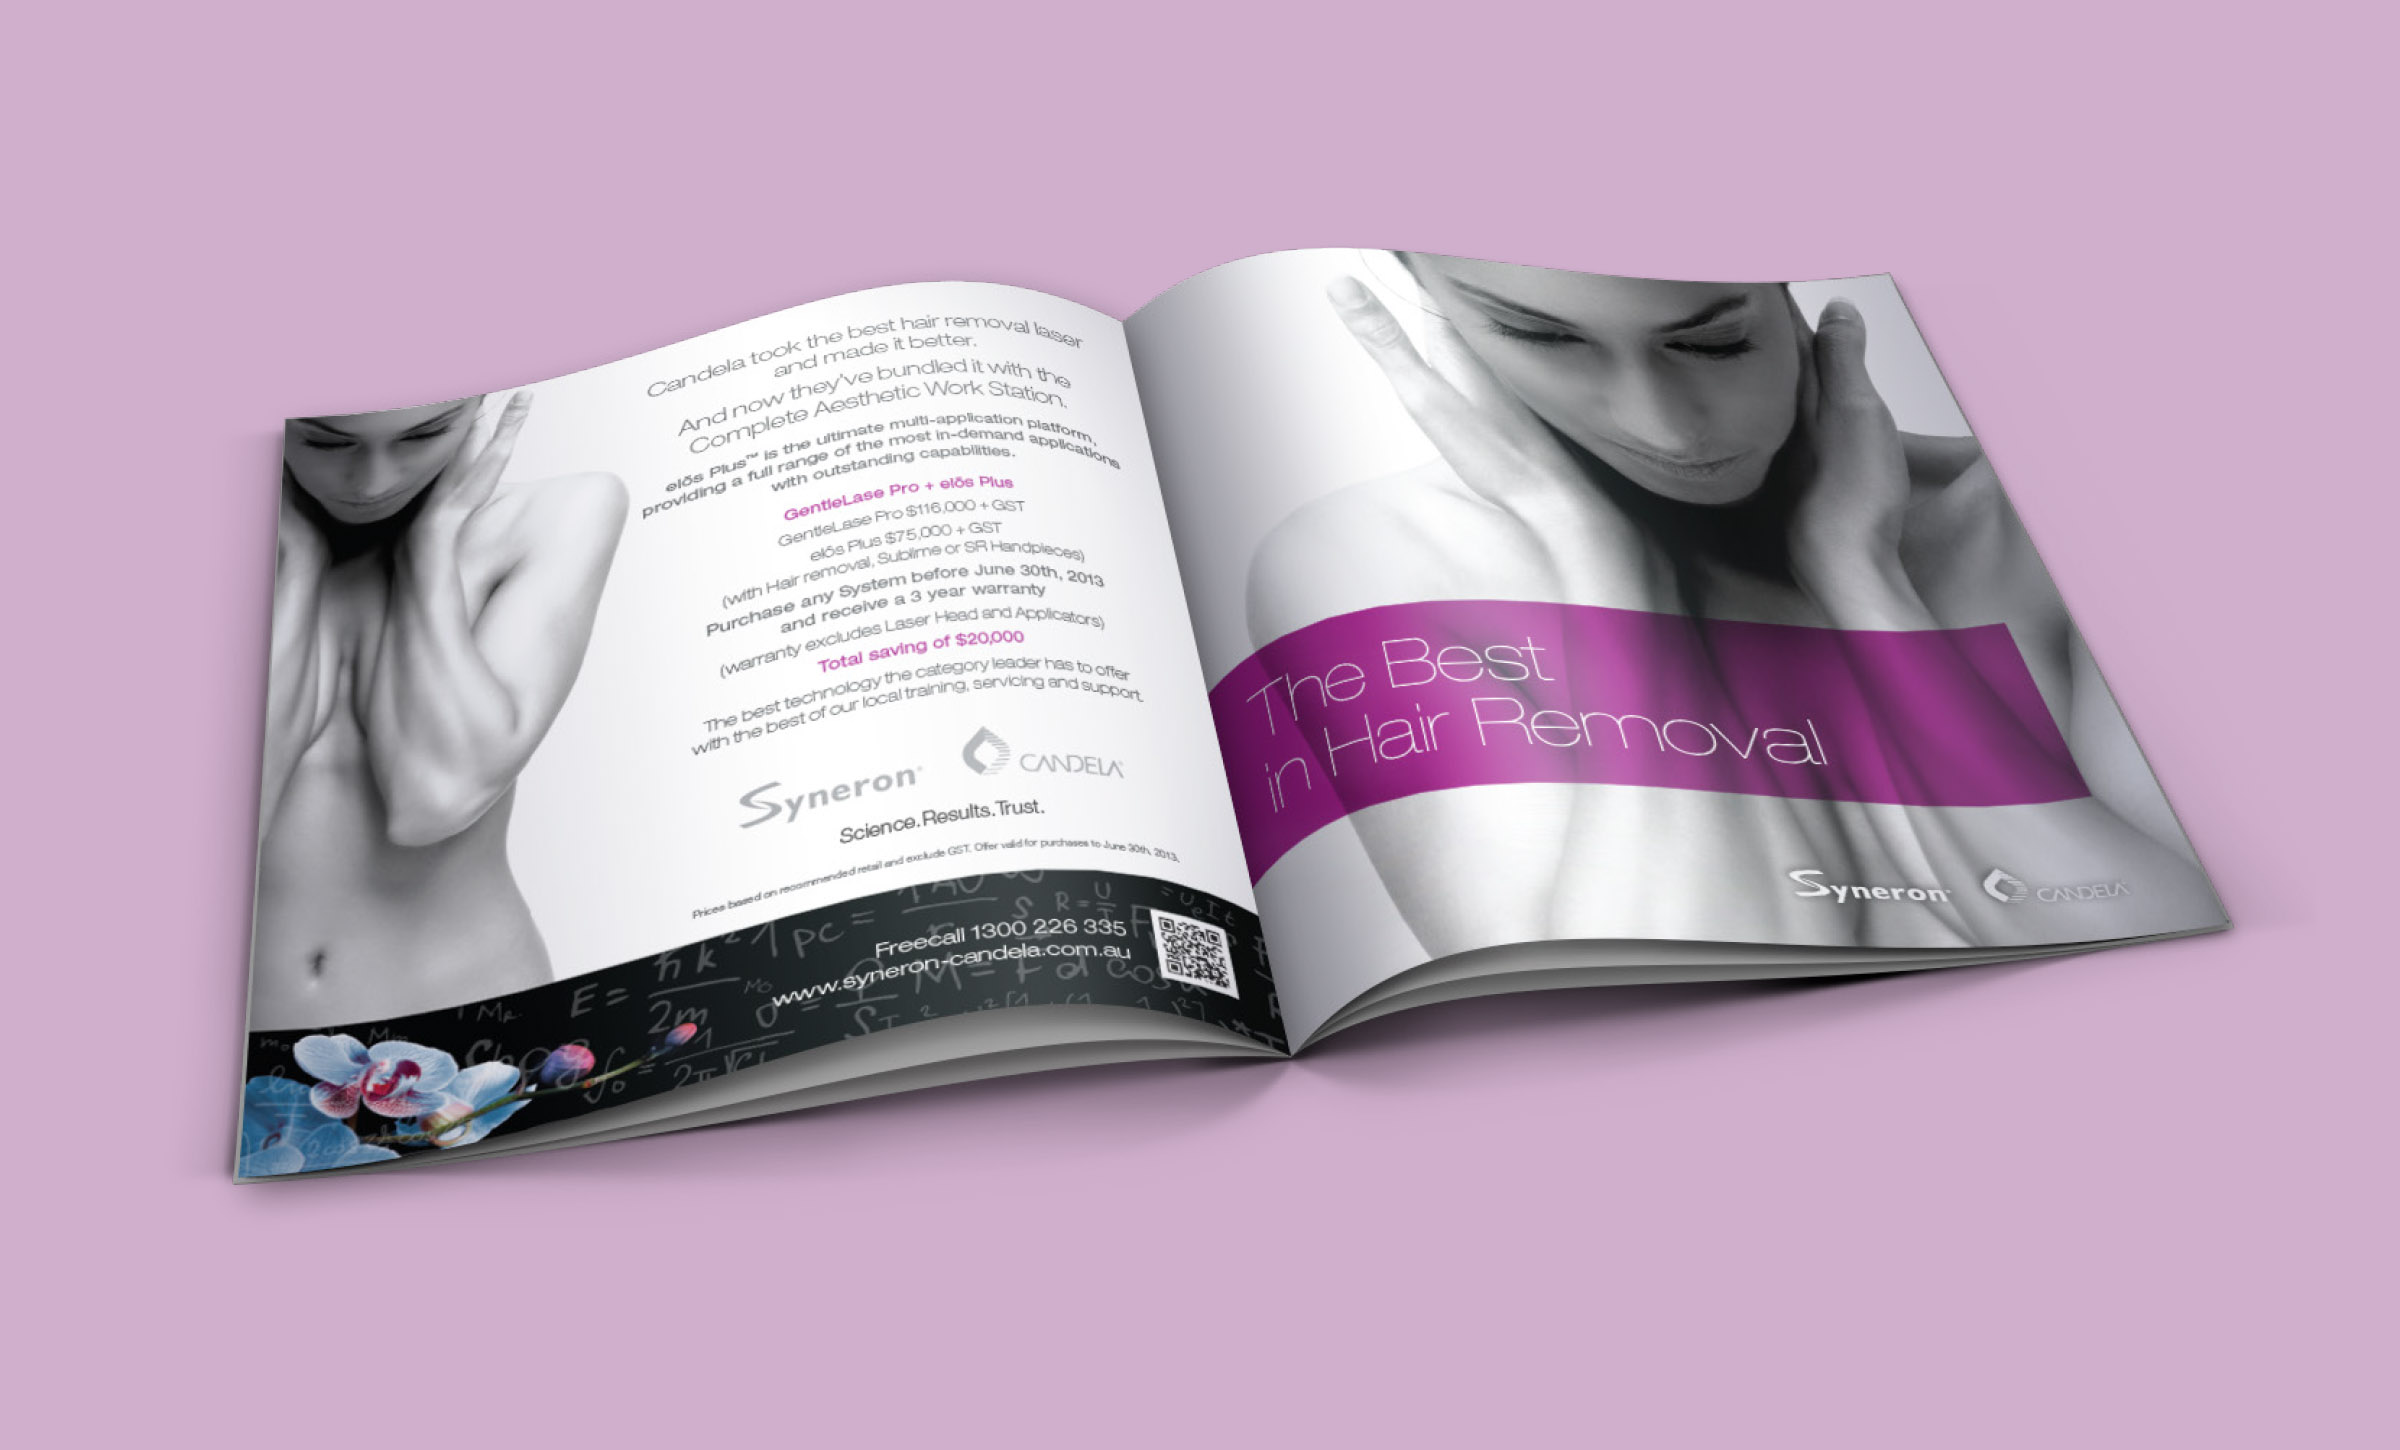 NRG Digital - Syneron Candela Corporate Branding and Marketing Campaign